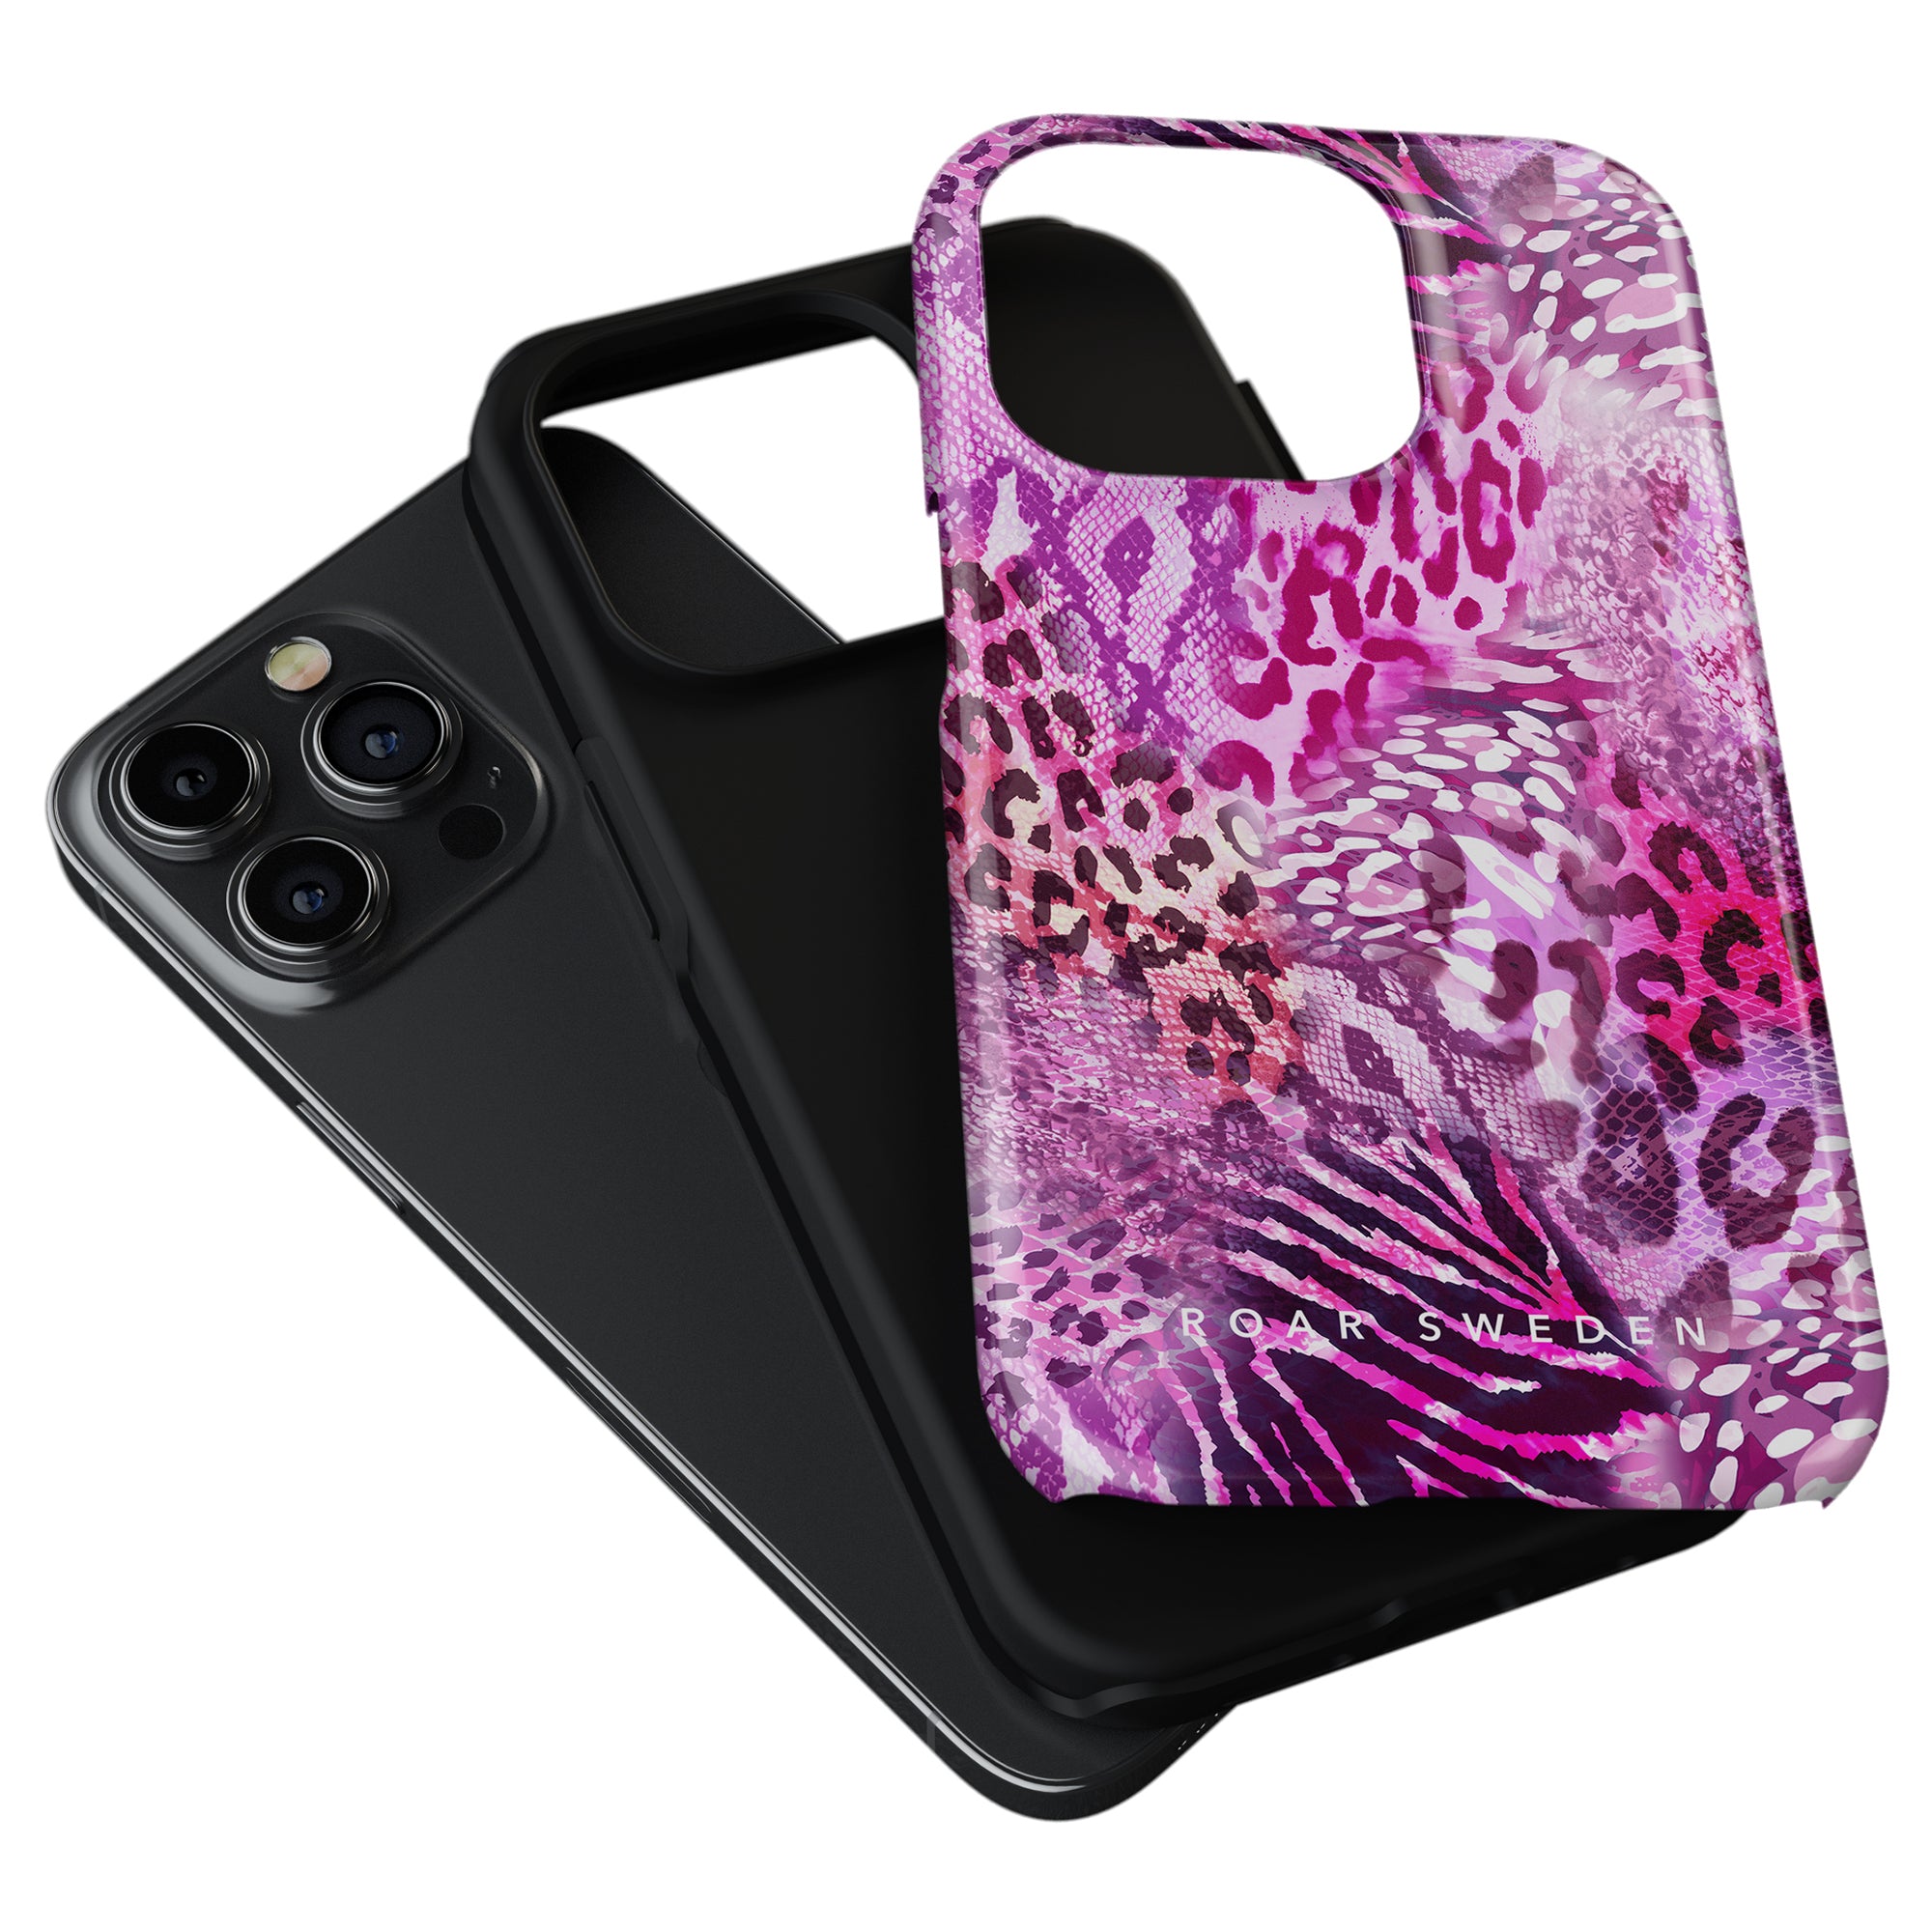 Two smartphones with a black Hybrid Collection case beside a Swirl Leopard - Tough Case with the text "ideal of sweden.